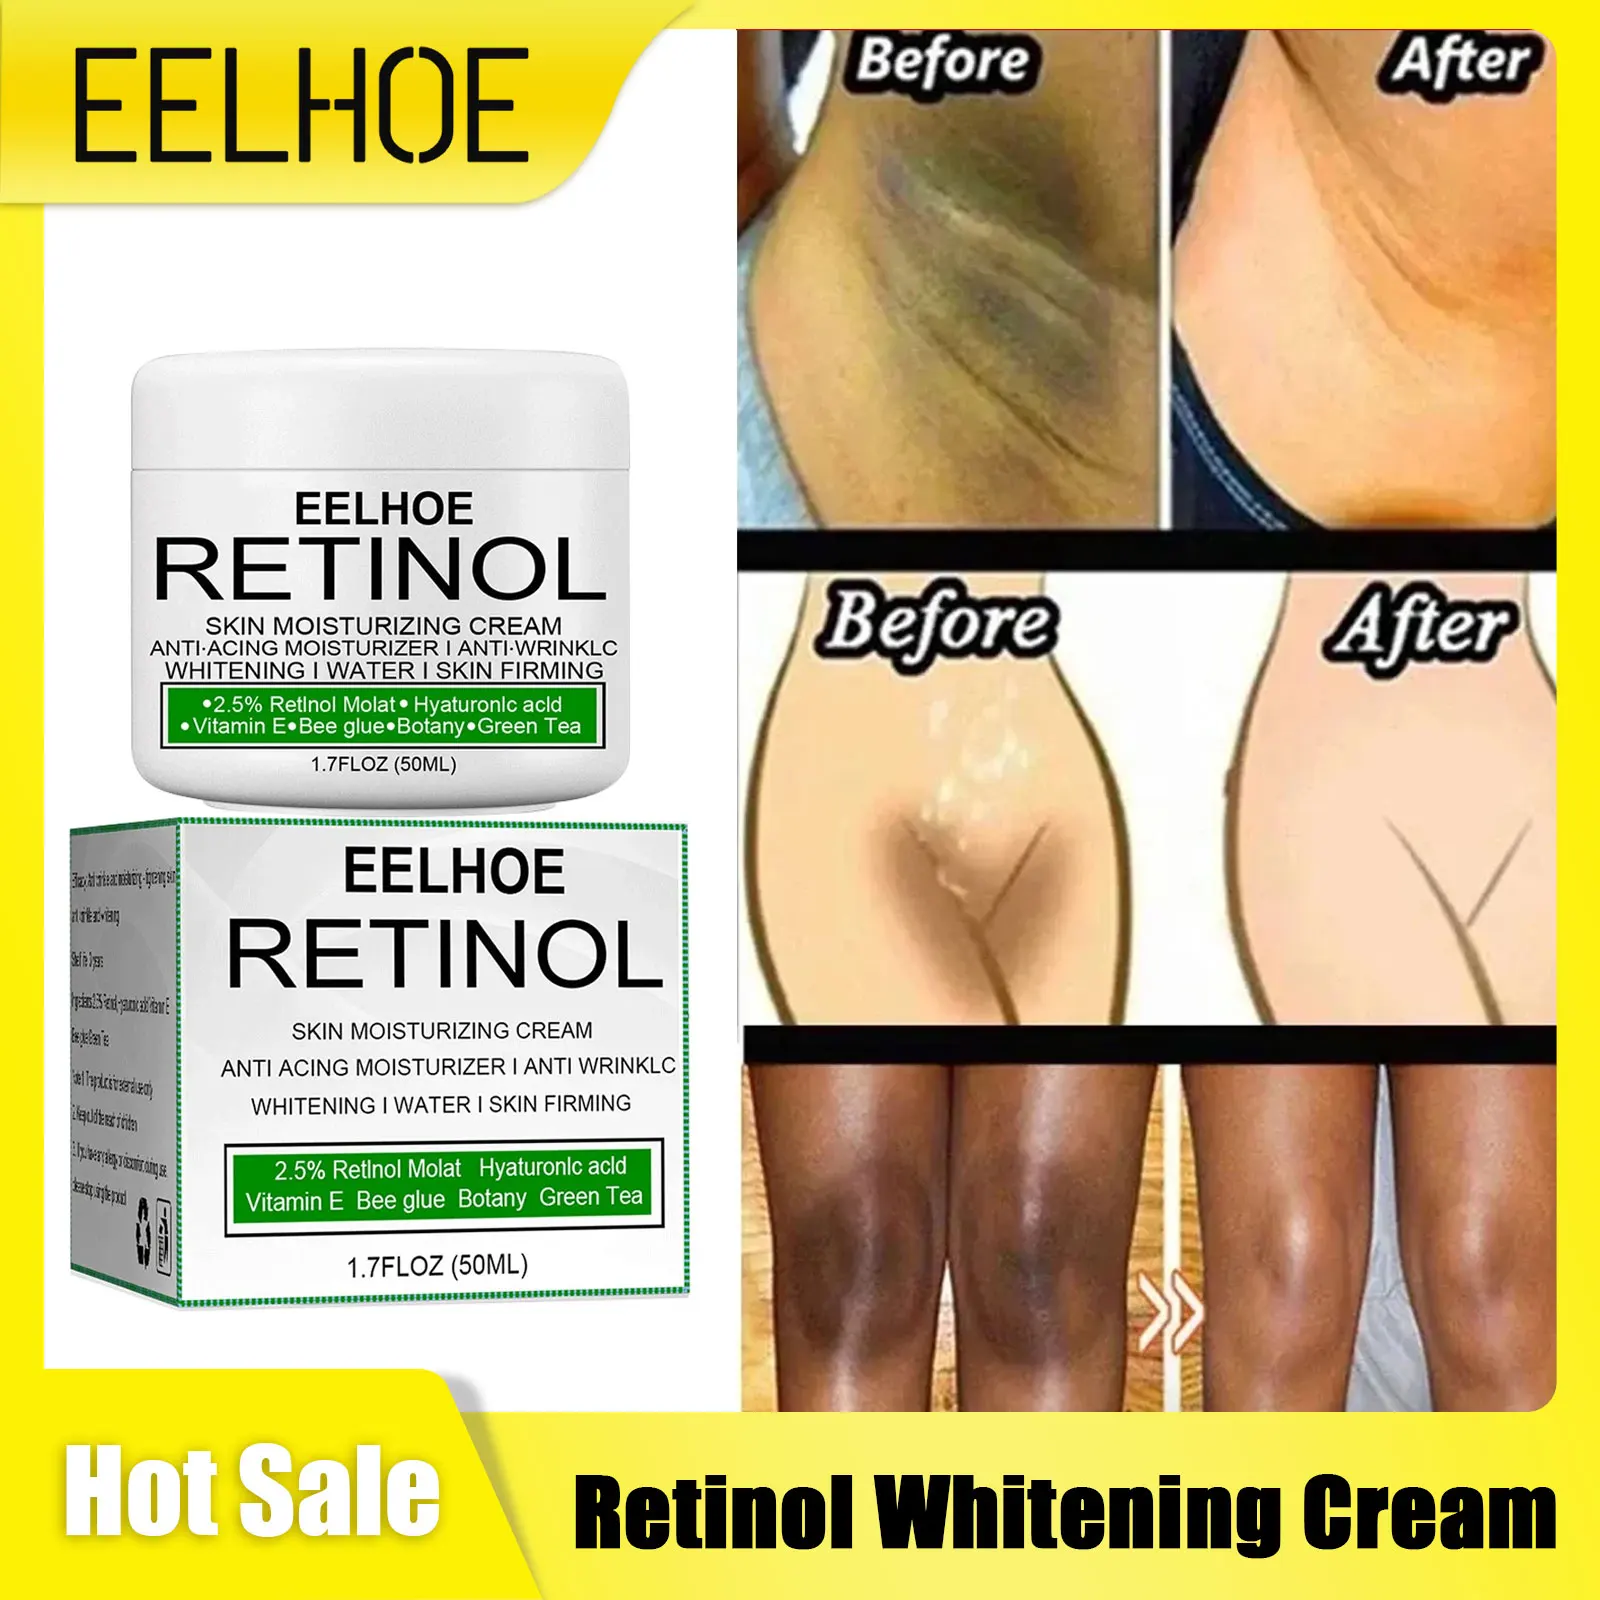 Retinol Whitening Cream for Private Part Brighten Dark Skin Permanent Bleaching Lotion for The Whole Body Underarm Knee Buttocks part and whole часть и целое